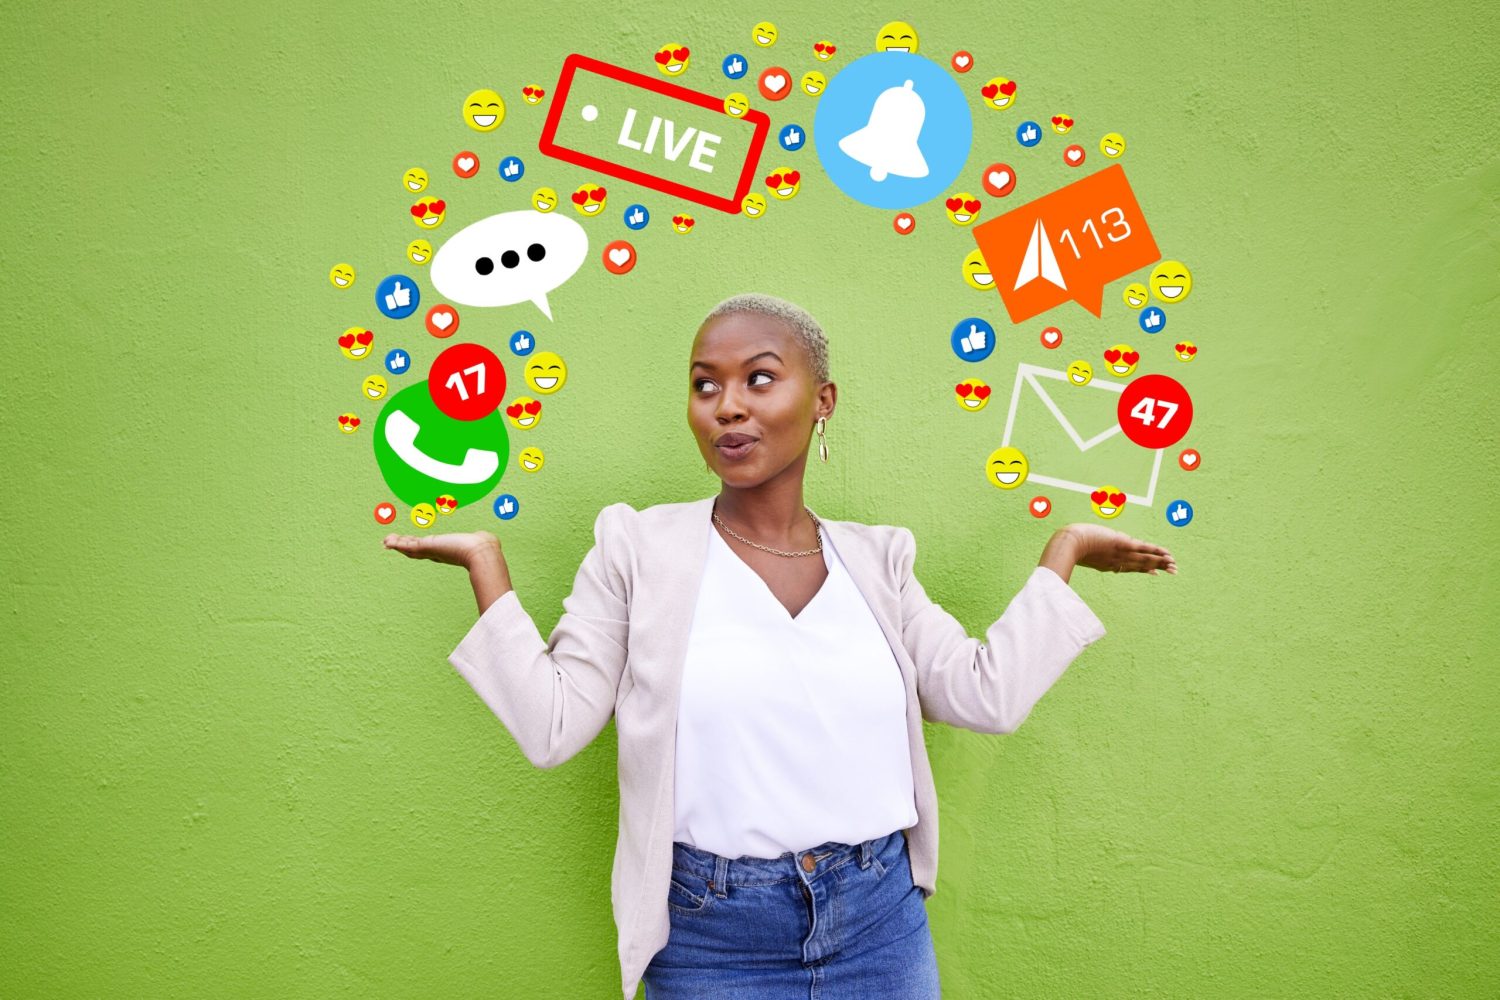 social-media-icon-connection-with-woman-wall-emoji-live-streaming-app-message-african-person-hands-online-chat-notification-network-communication-overlay-green-background-min